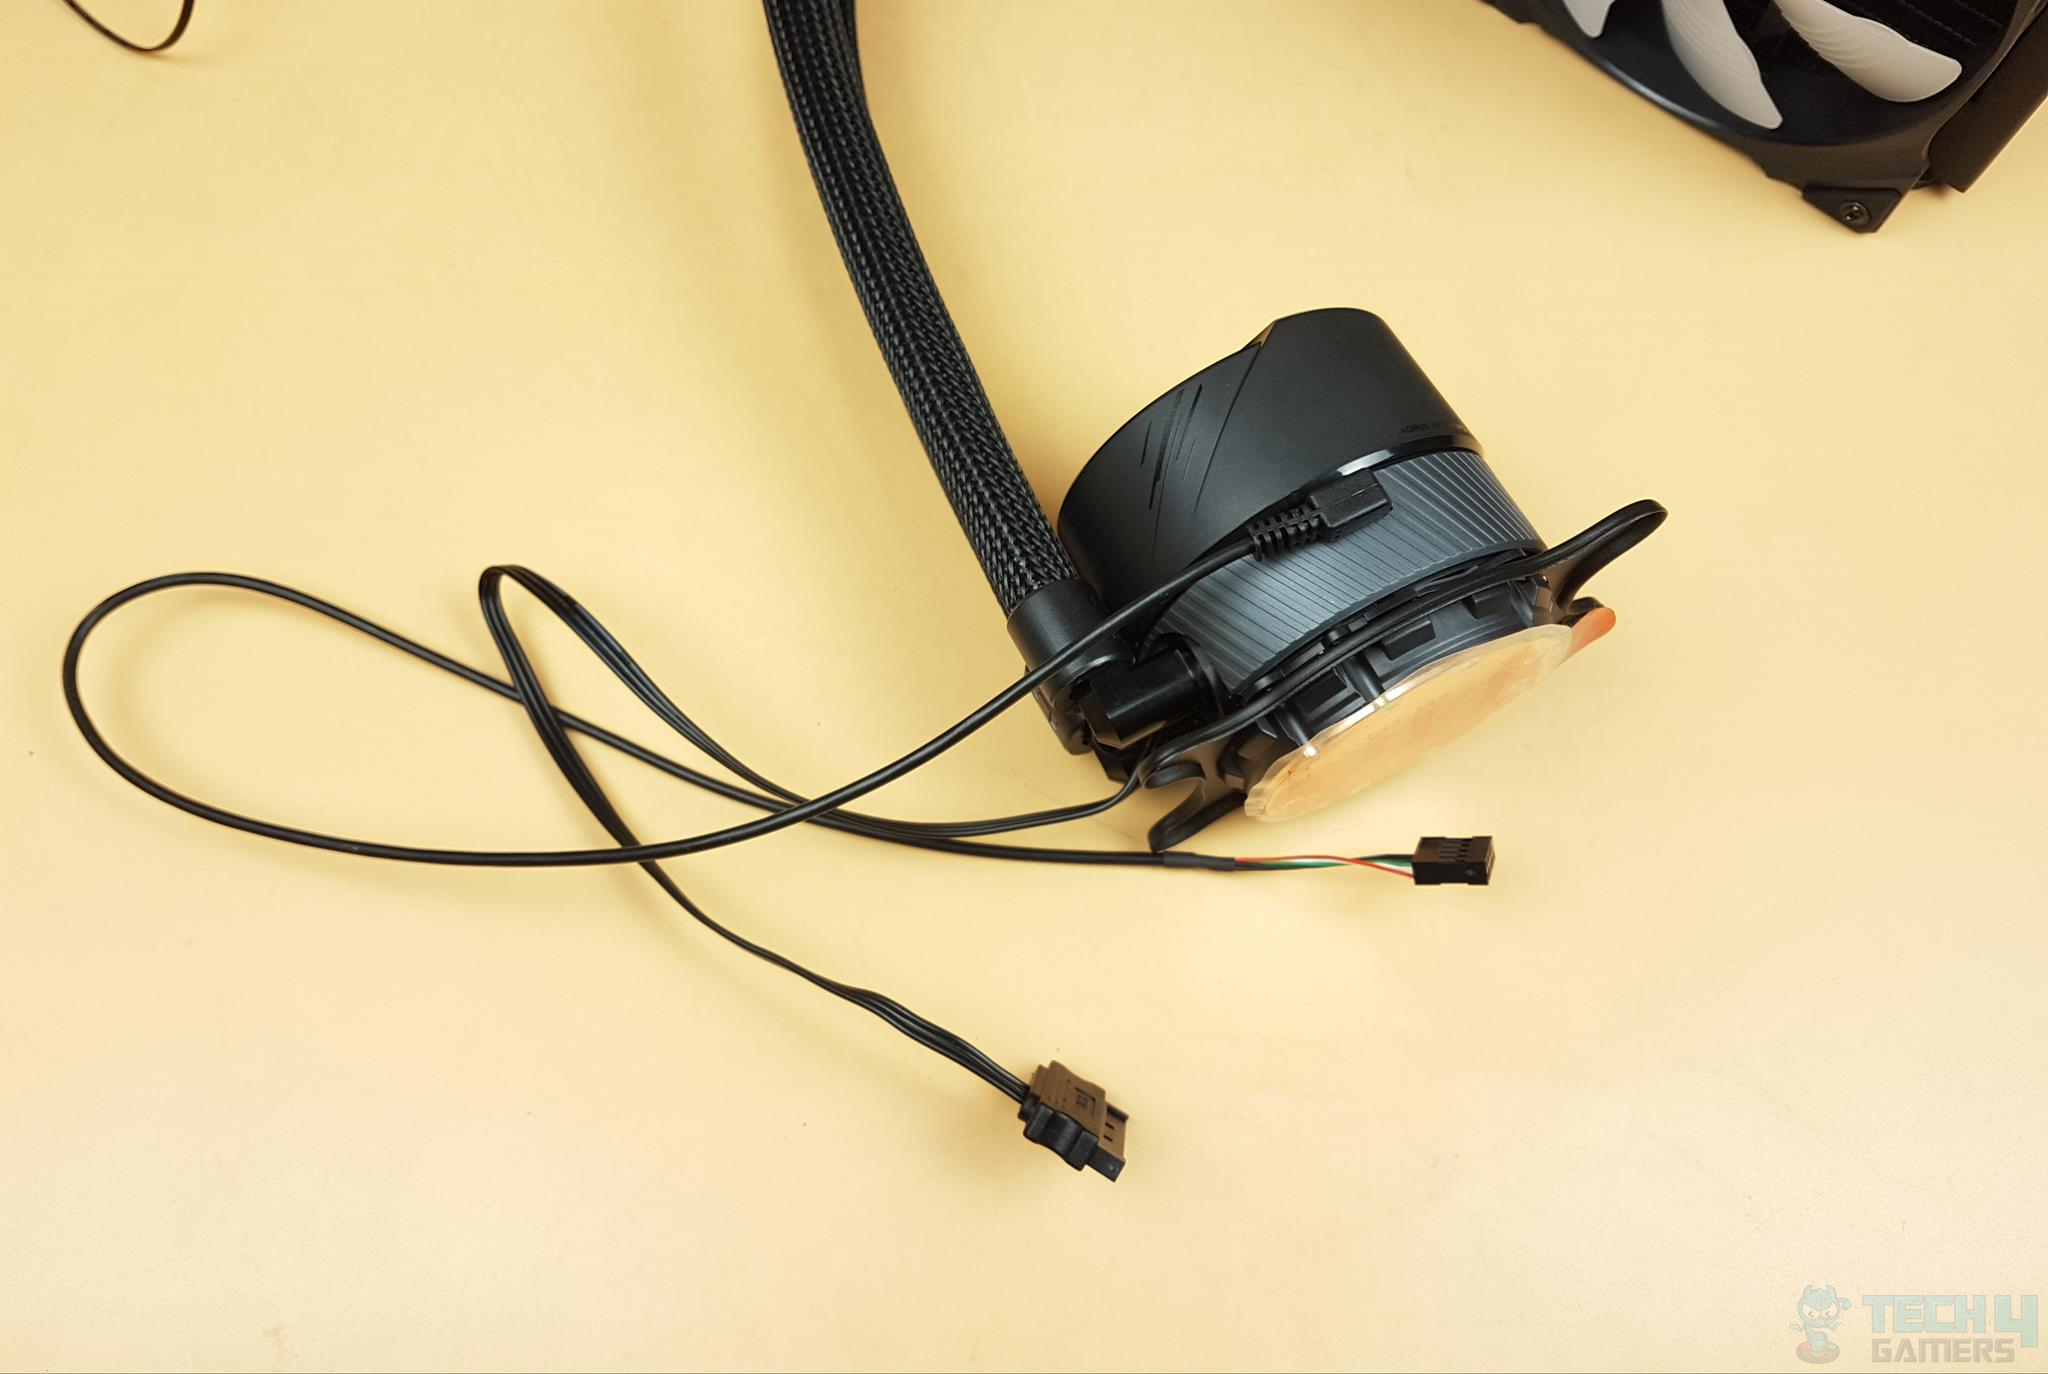 AORUS WATERFORCE X 280 micro-USB cable connected to the block